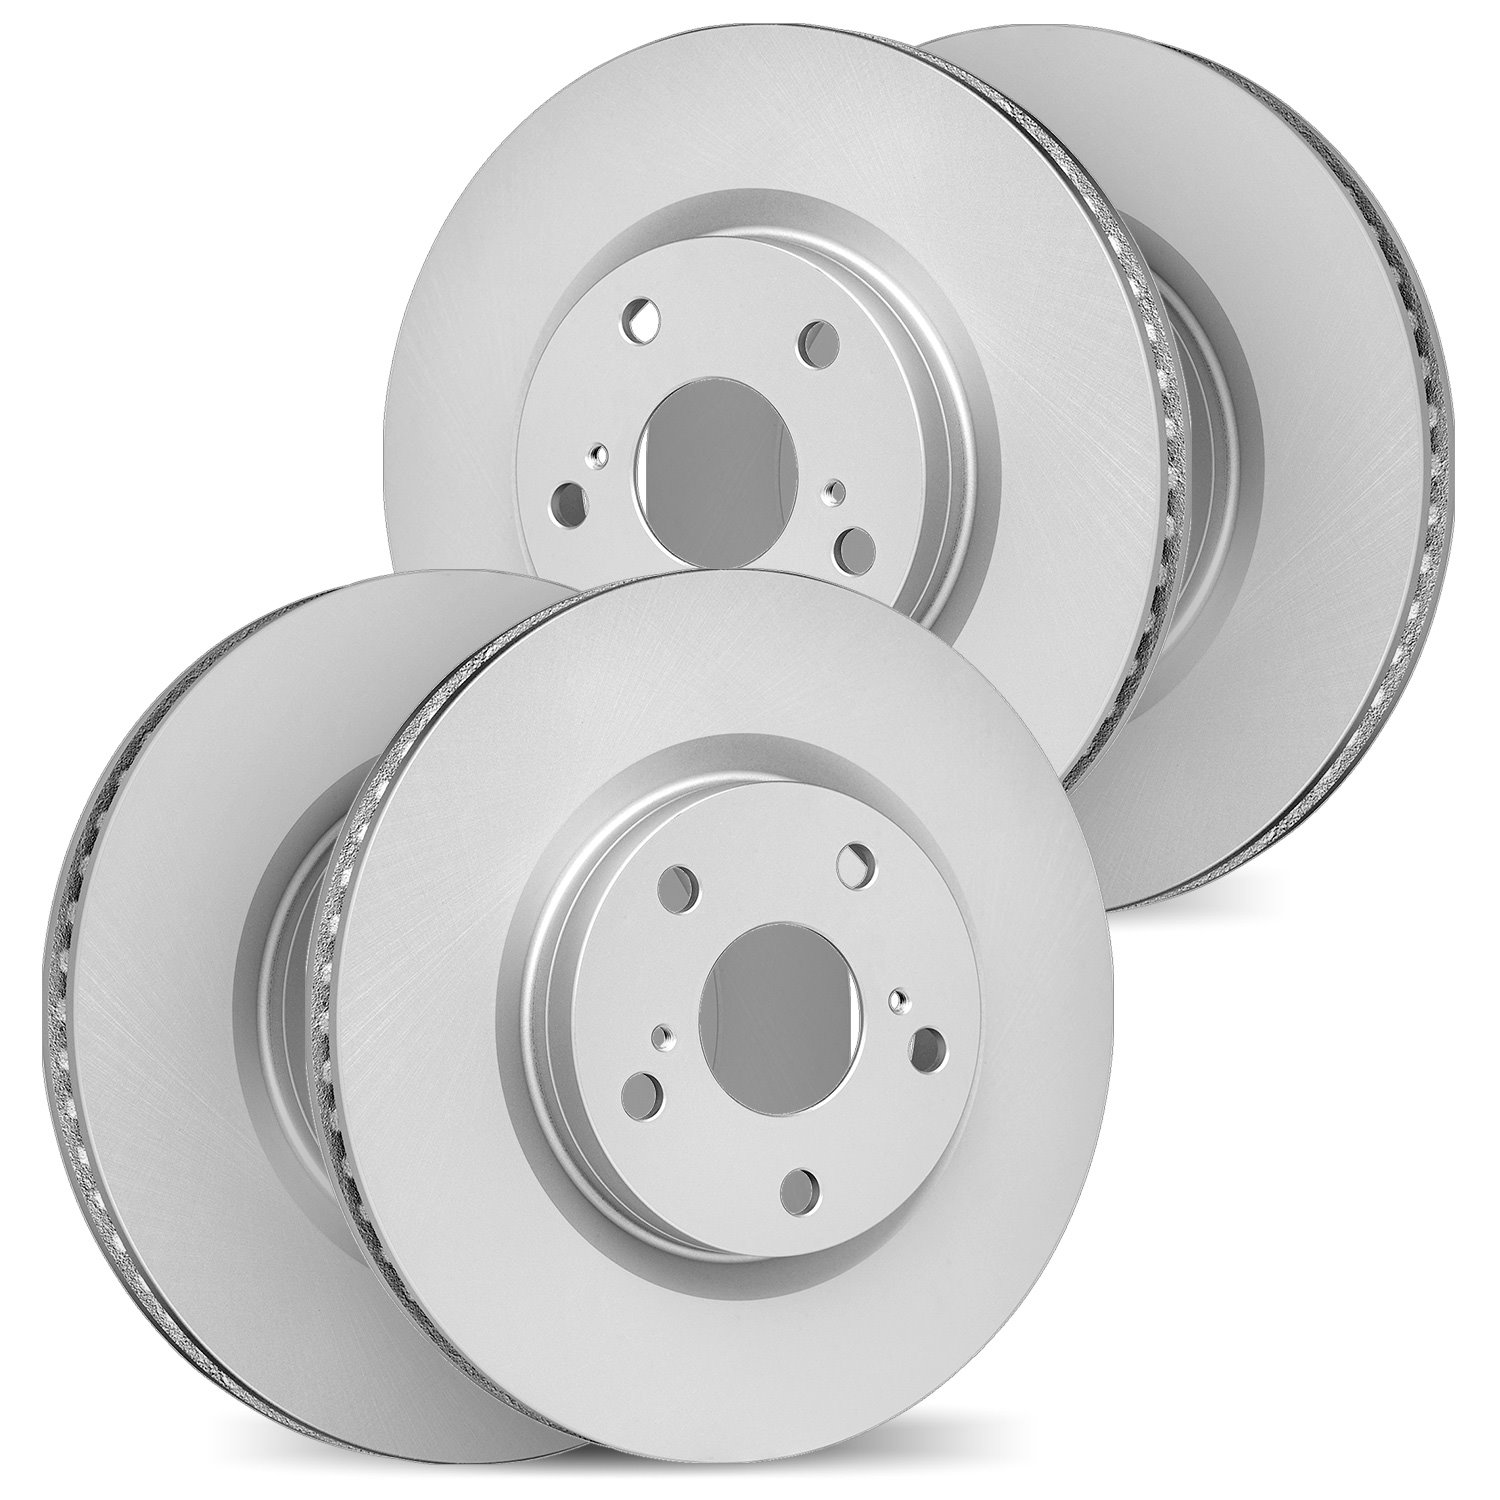 4004-67060 Geospec Brake Rotors, Fits Select Infiniti/Nissan, Position: Front and Rear